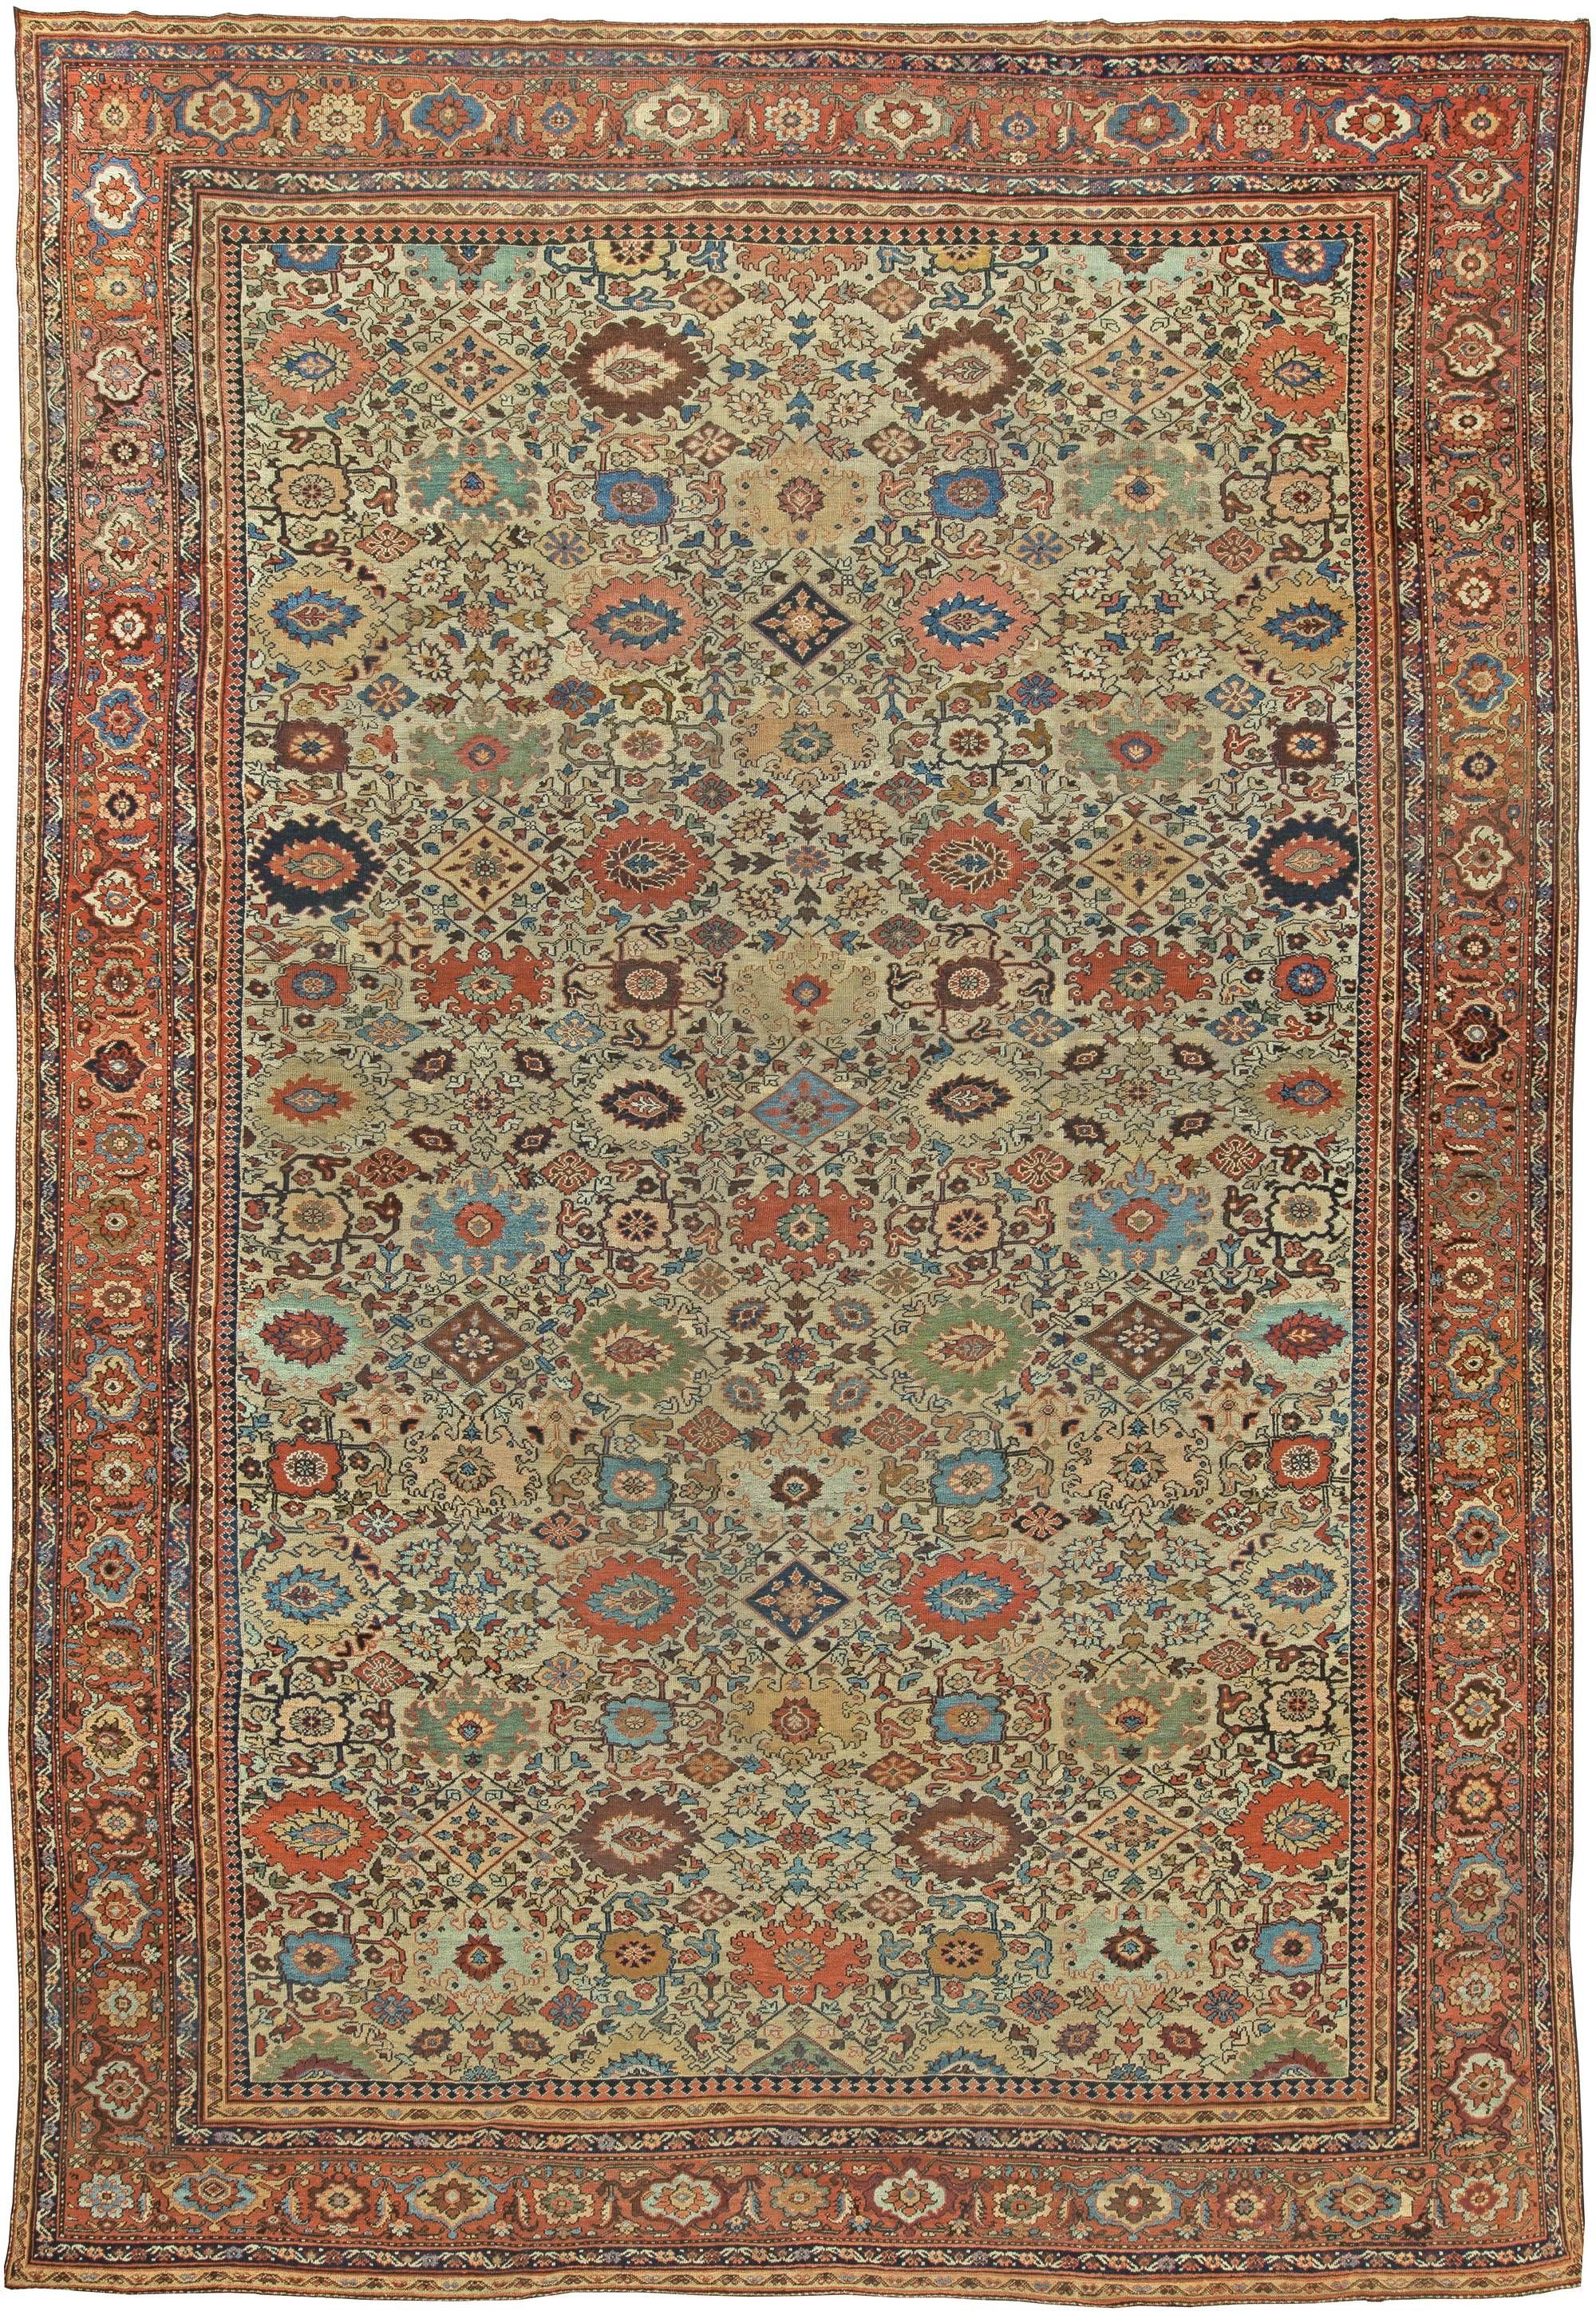 Antique Rugs From Doris Leslie Blau New York Antique Carpets Pertaining To Vintage Rugs (View 6 of 15)